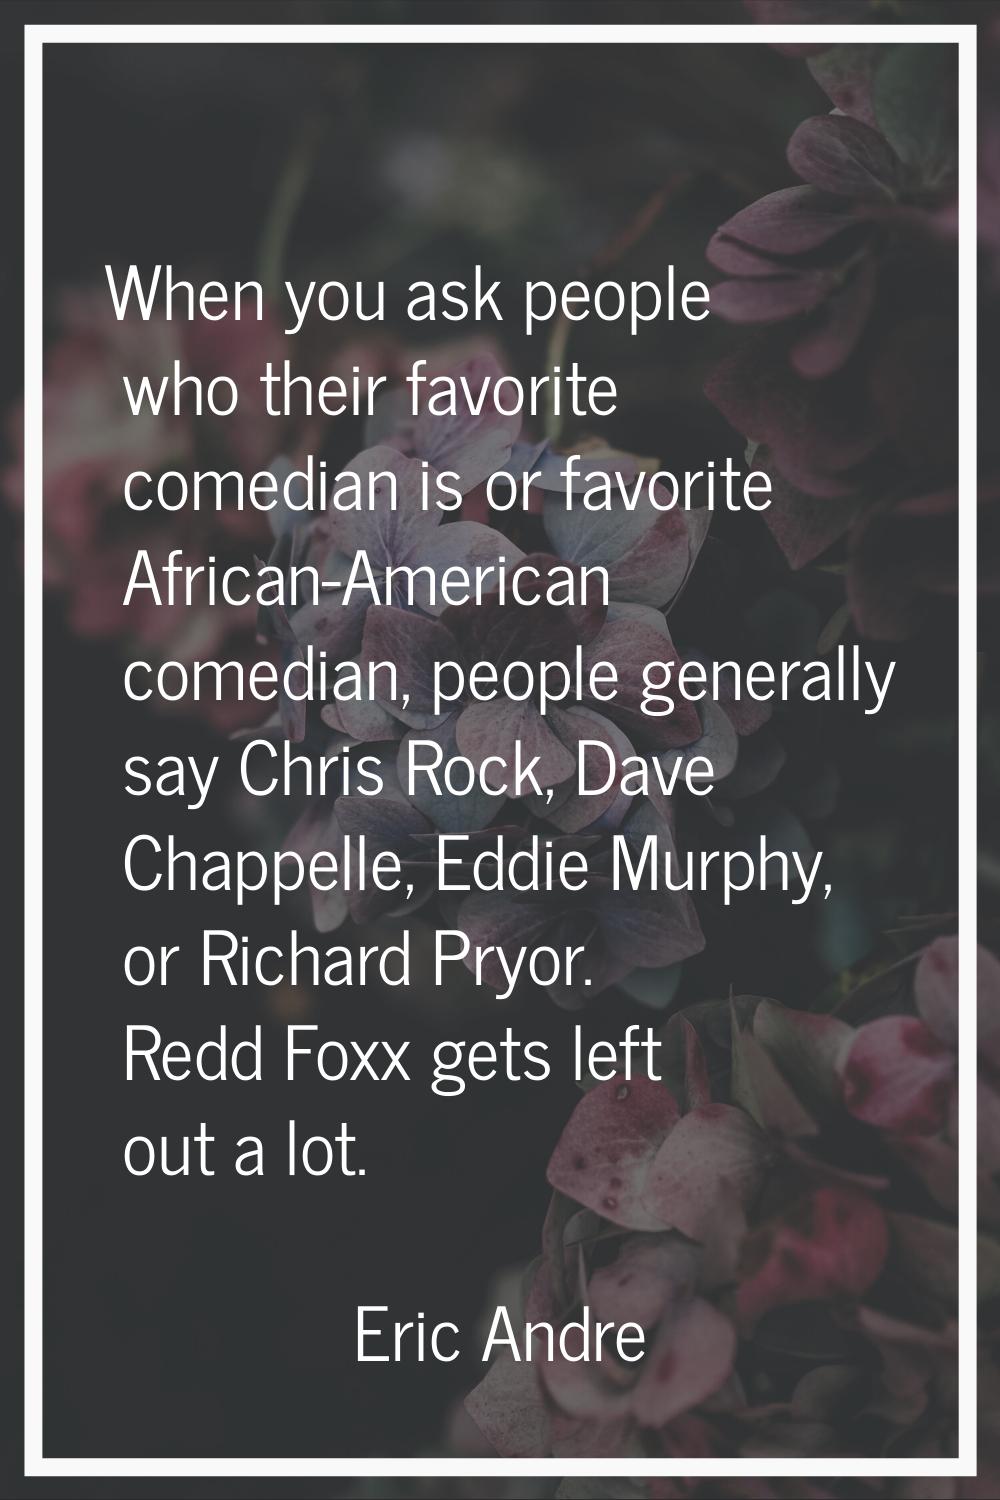 When you ask people who their favorite comedian is or favorite African-American comedian, people ge